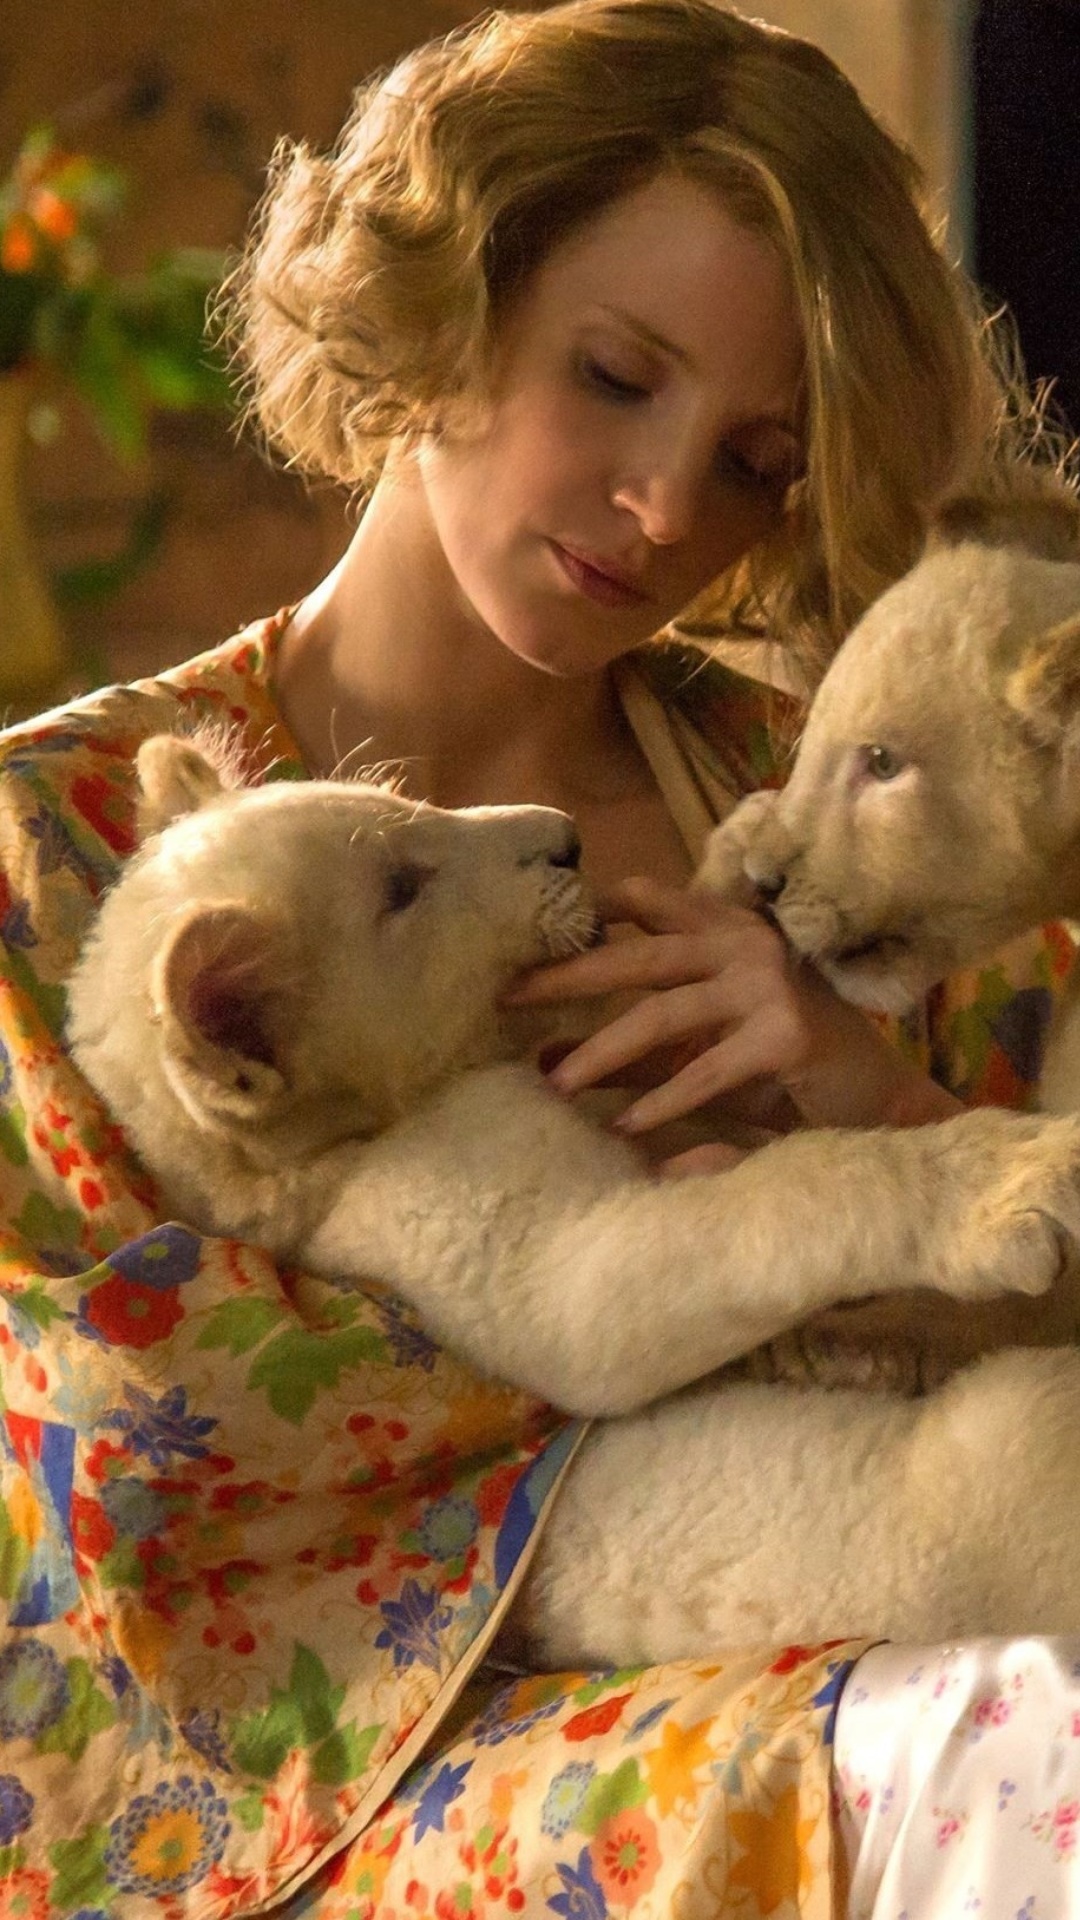 The Zookeepers Wife Film with Jessica Chastain wallpaper 1080x1920